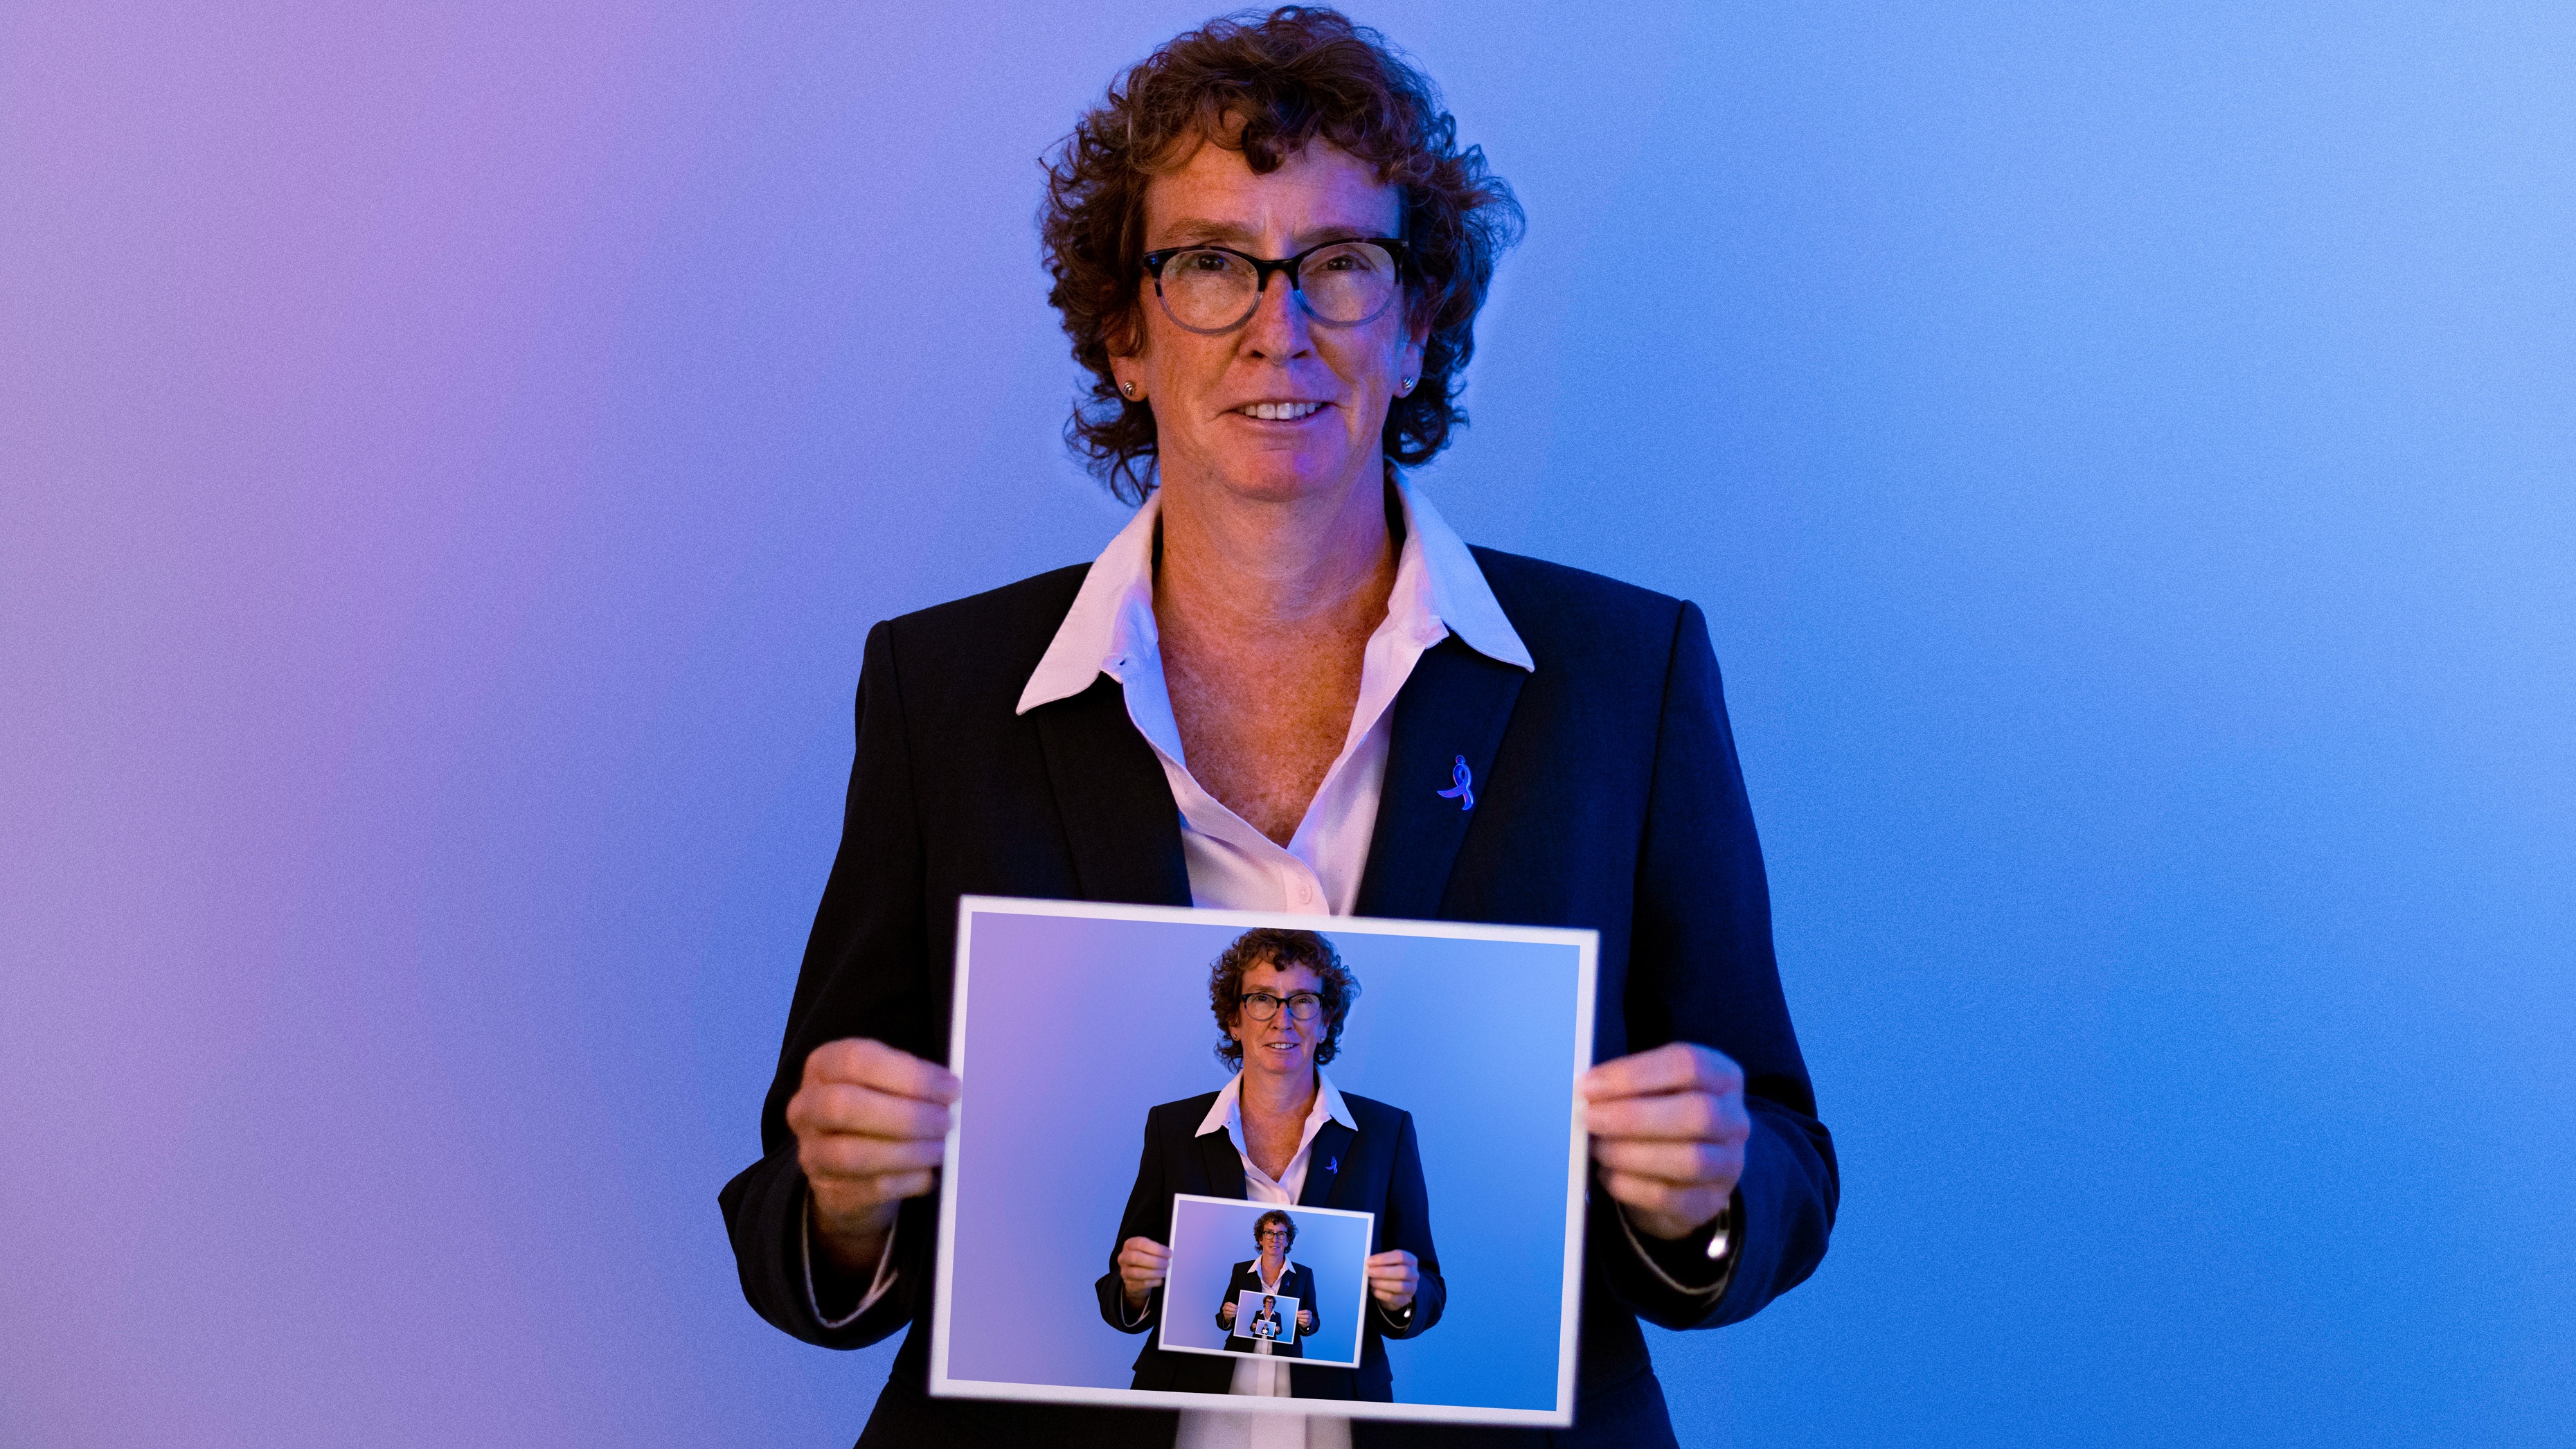 Cathy Awwad holding repeating images of herself, from photos taken in her Waterbury, Connecticut office